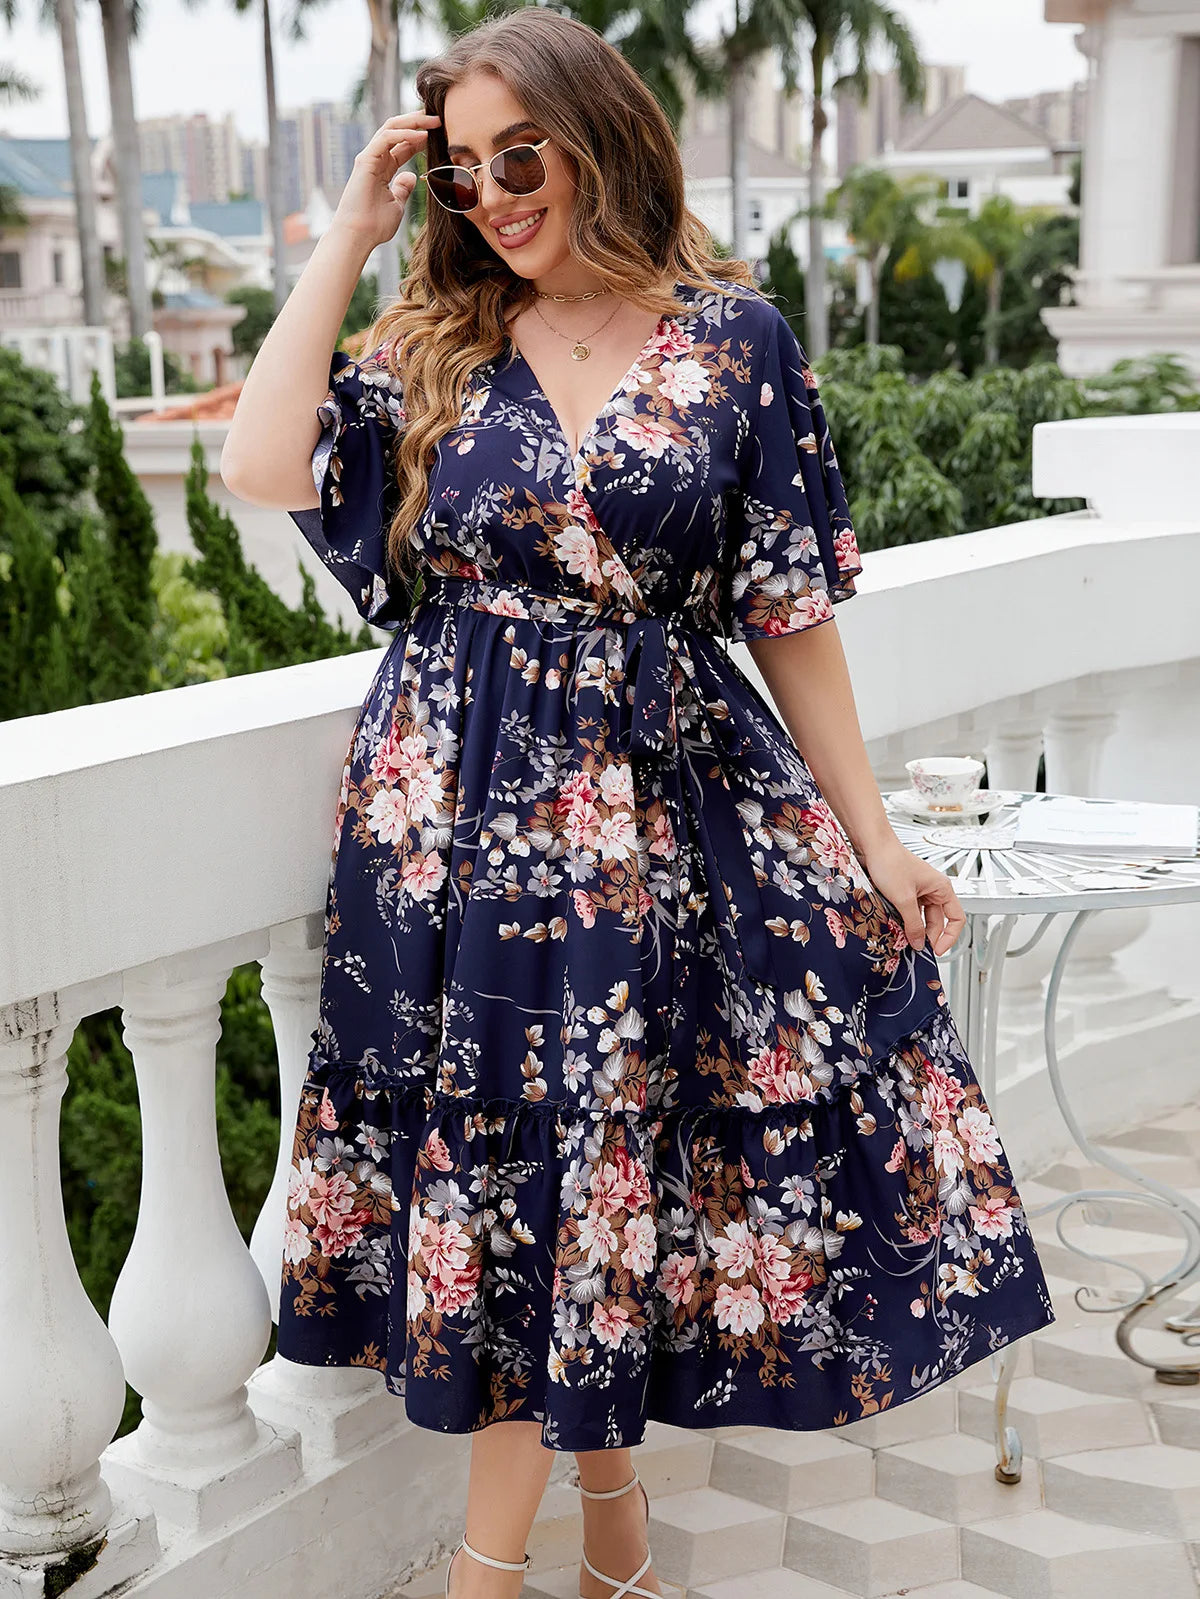 Female Elegant and Pretty Casual Lace Up dress